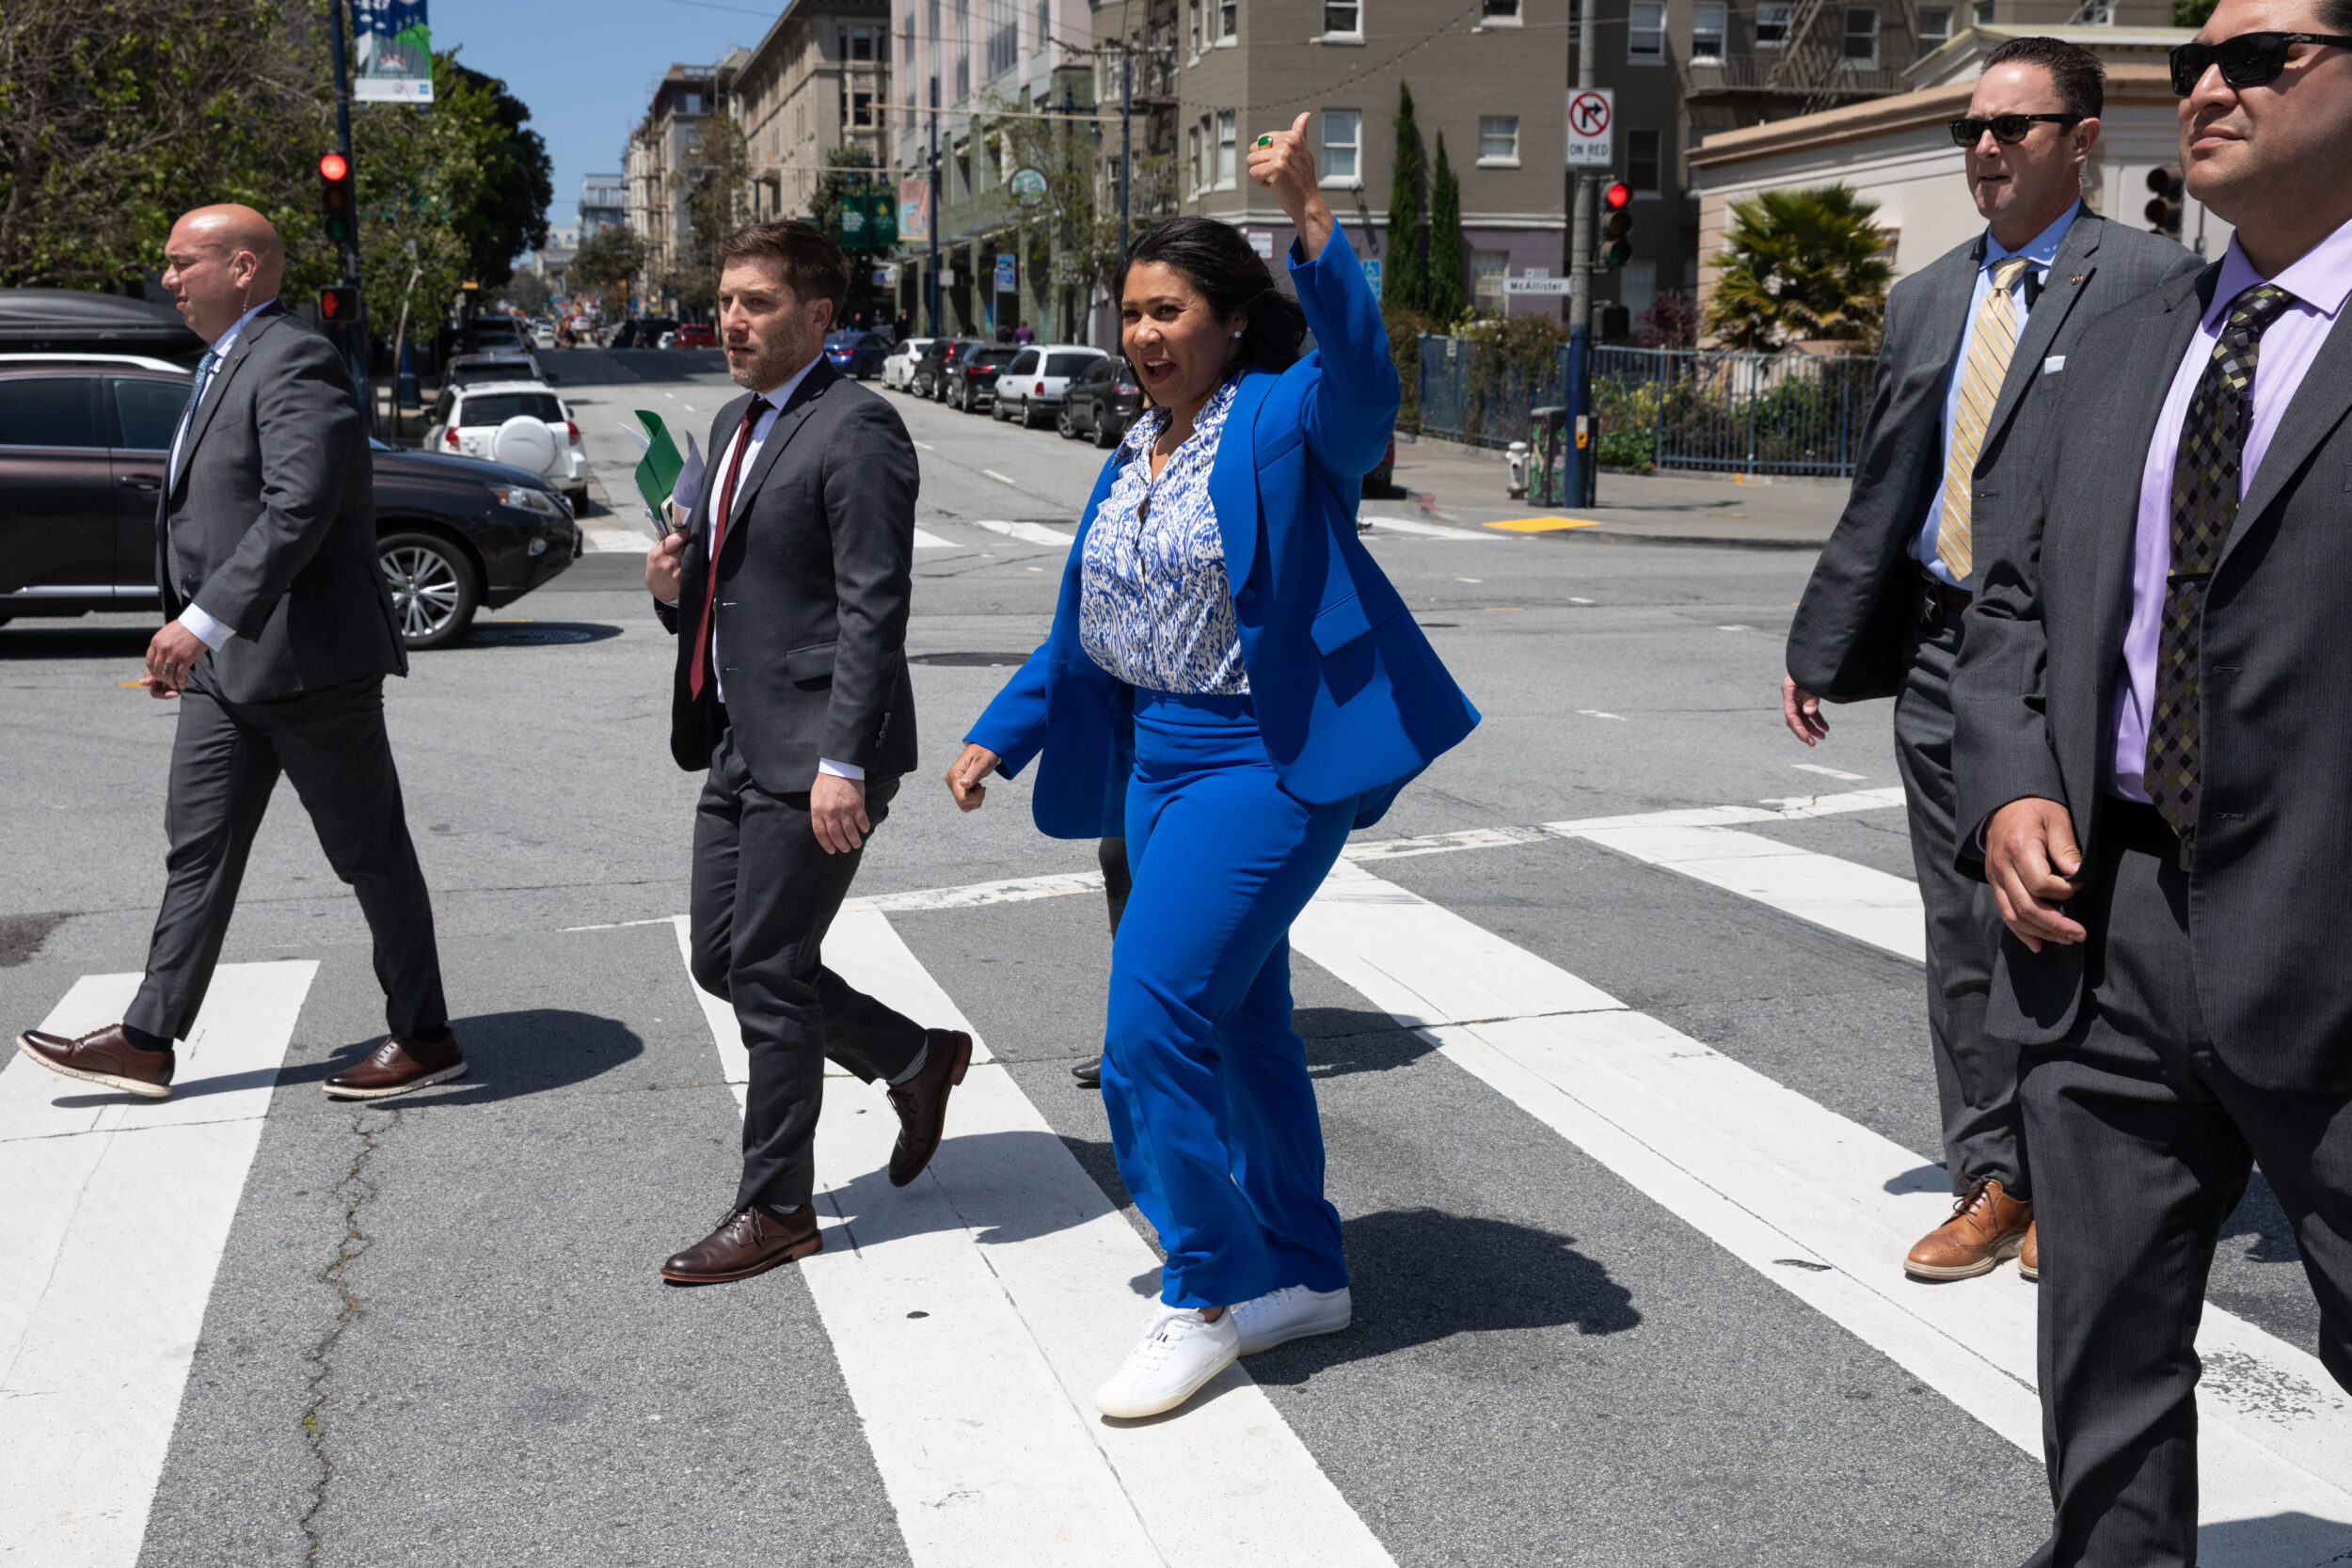 Mayor London Breed crosses a street with her colleagues.